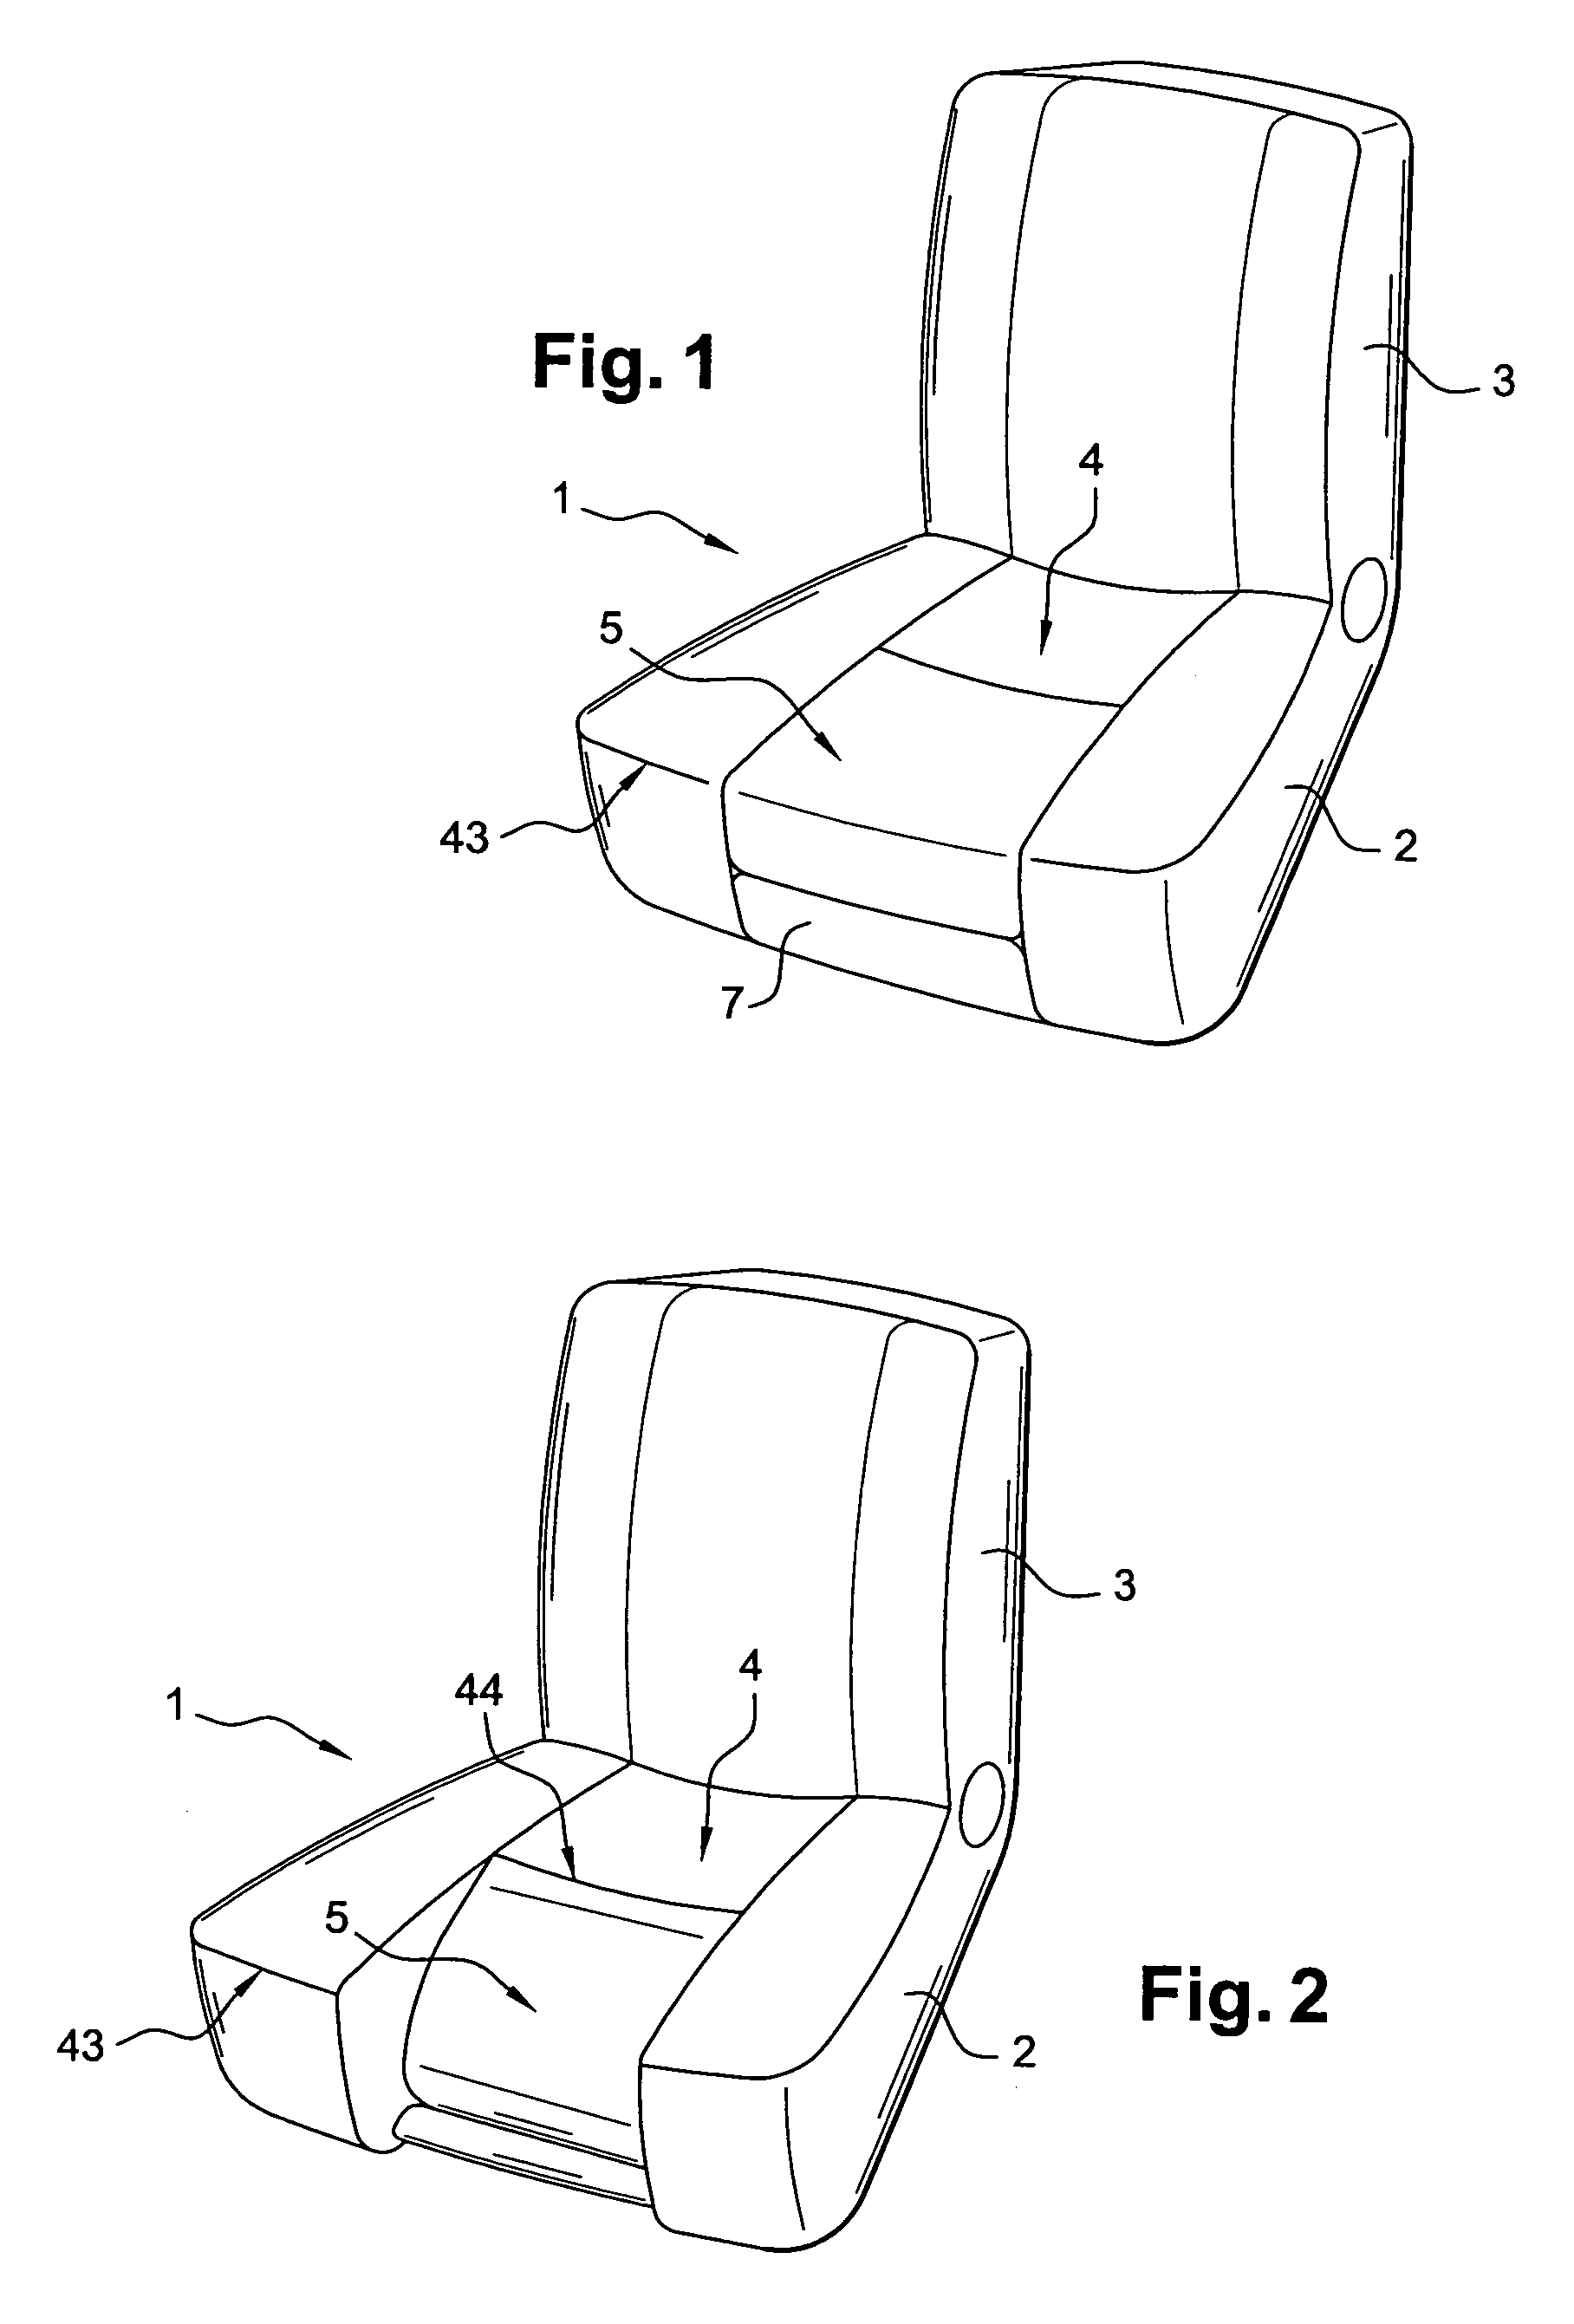 Automobile vehicle seat adaptable to accommodate a child